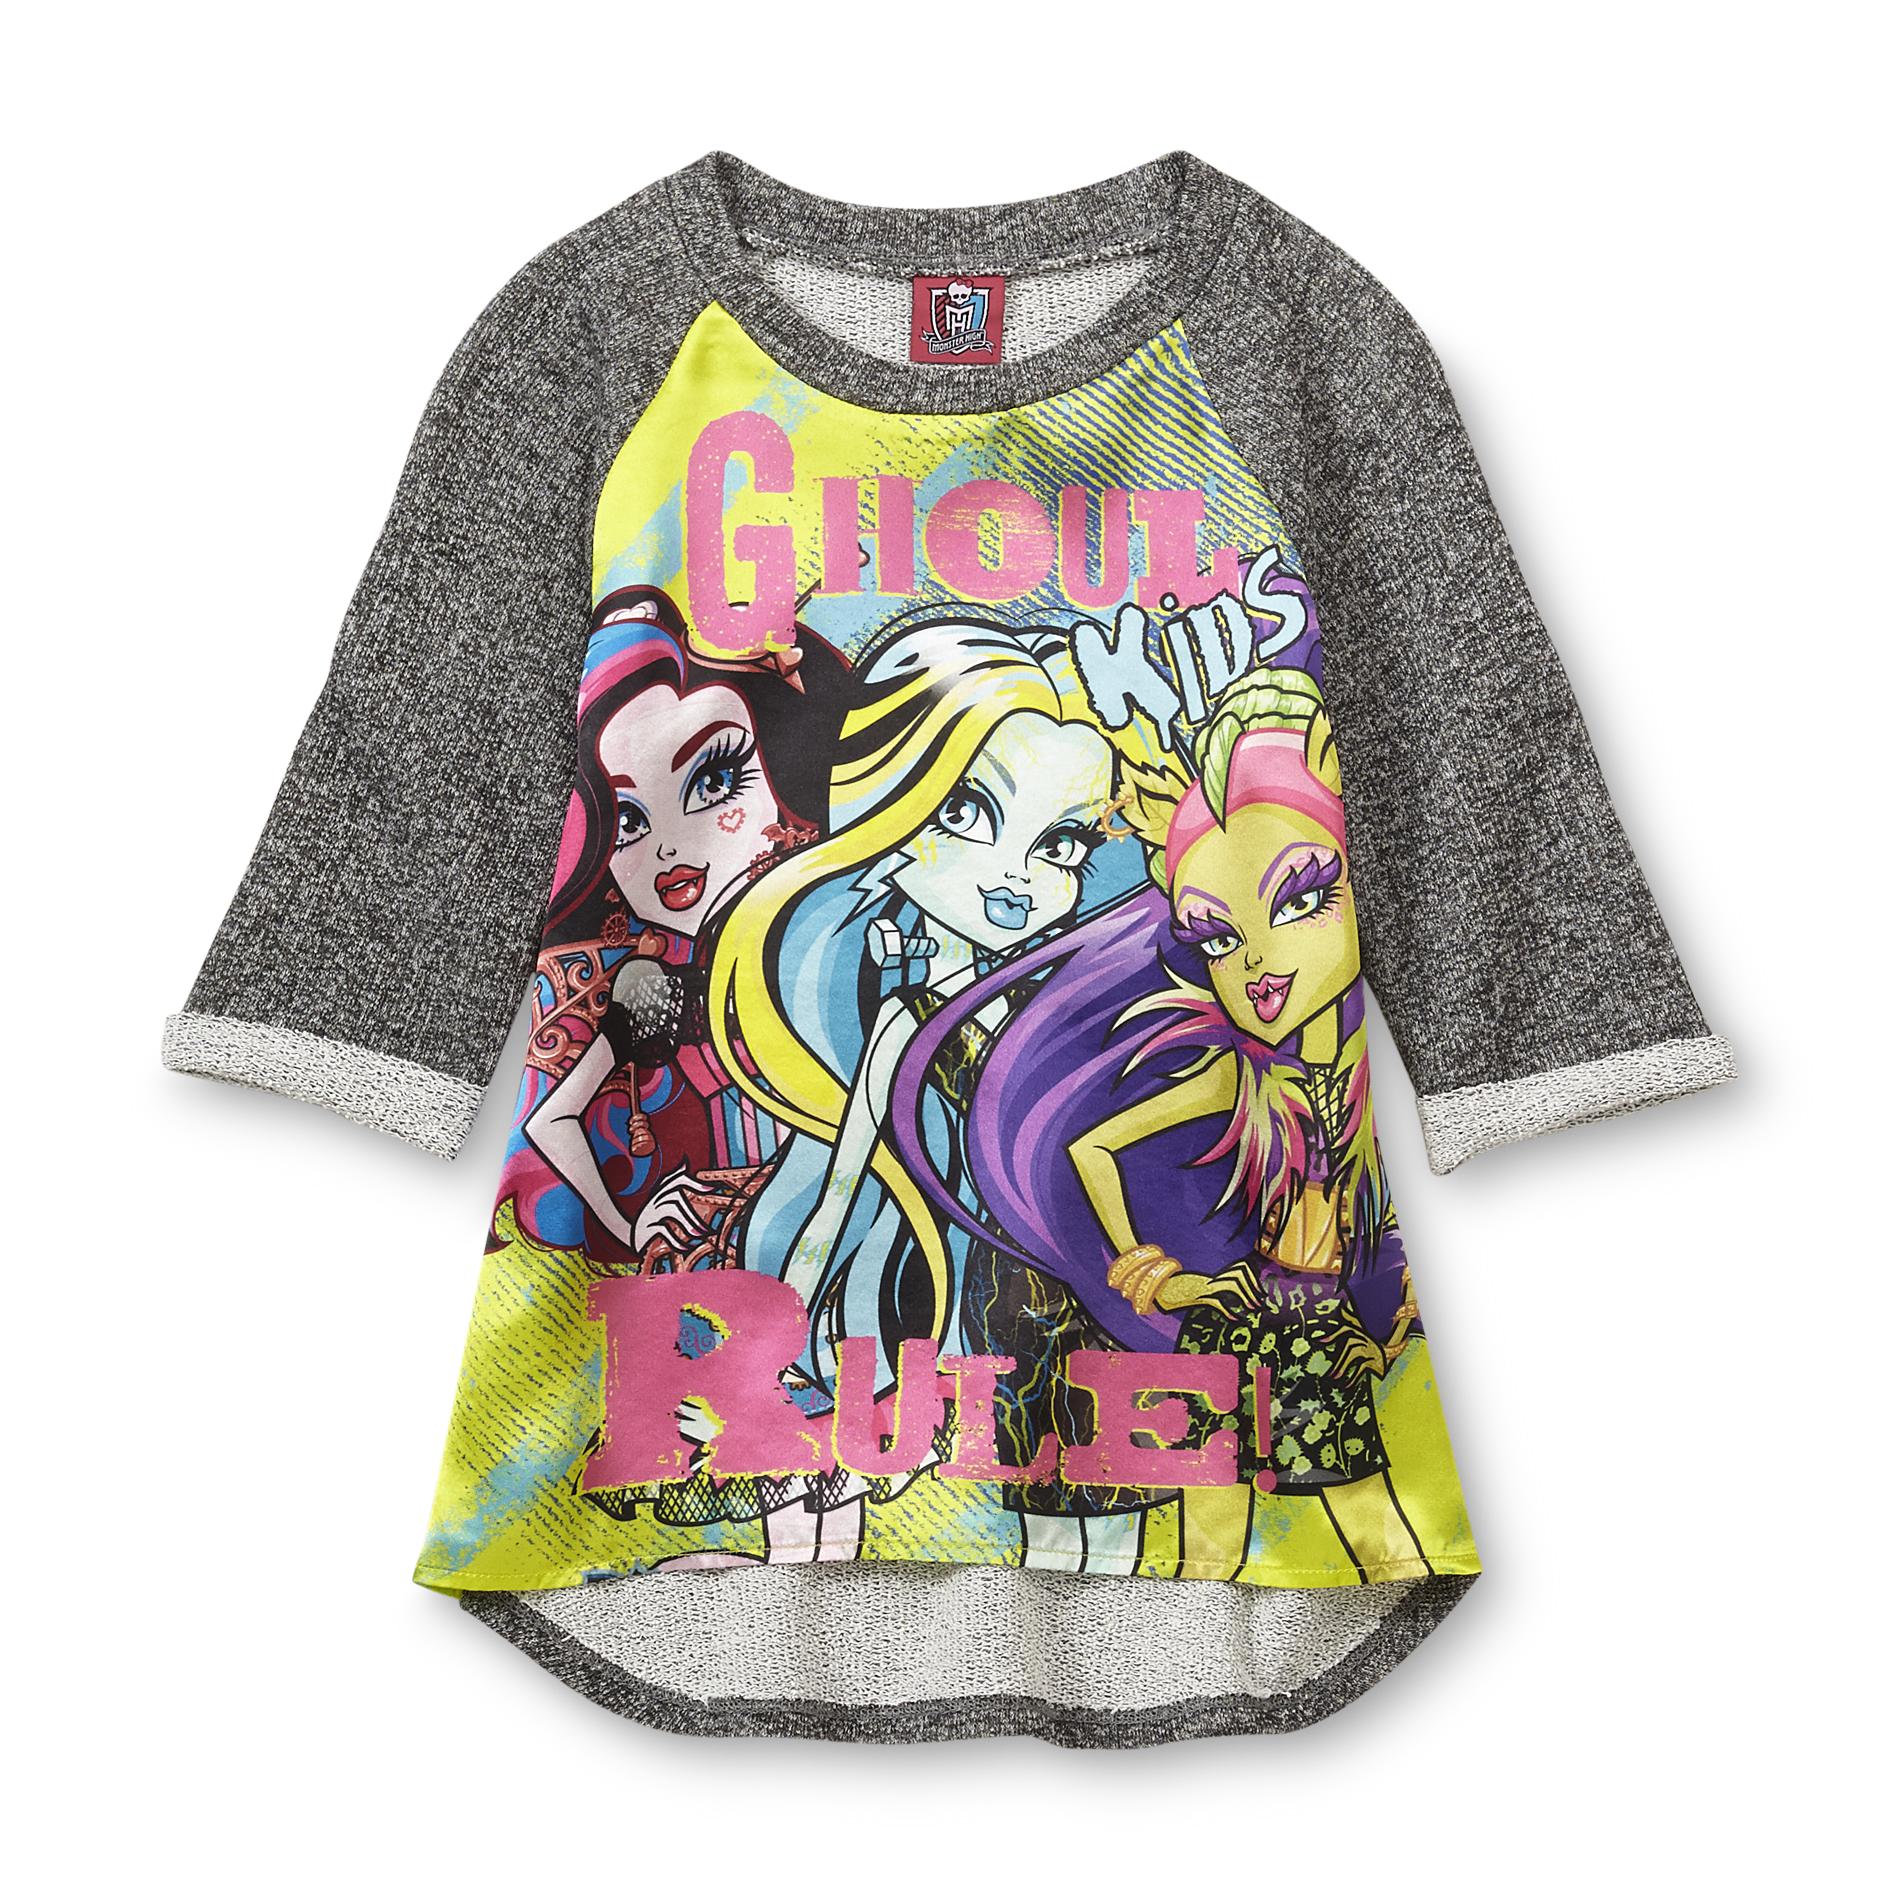 Monster High Girl's Graphic Top - Ghoul Kids Rules